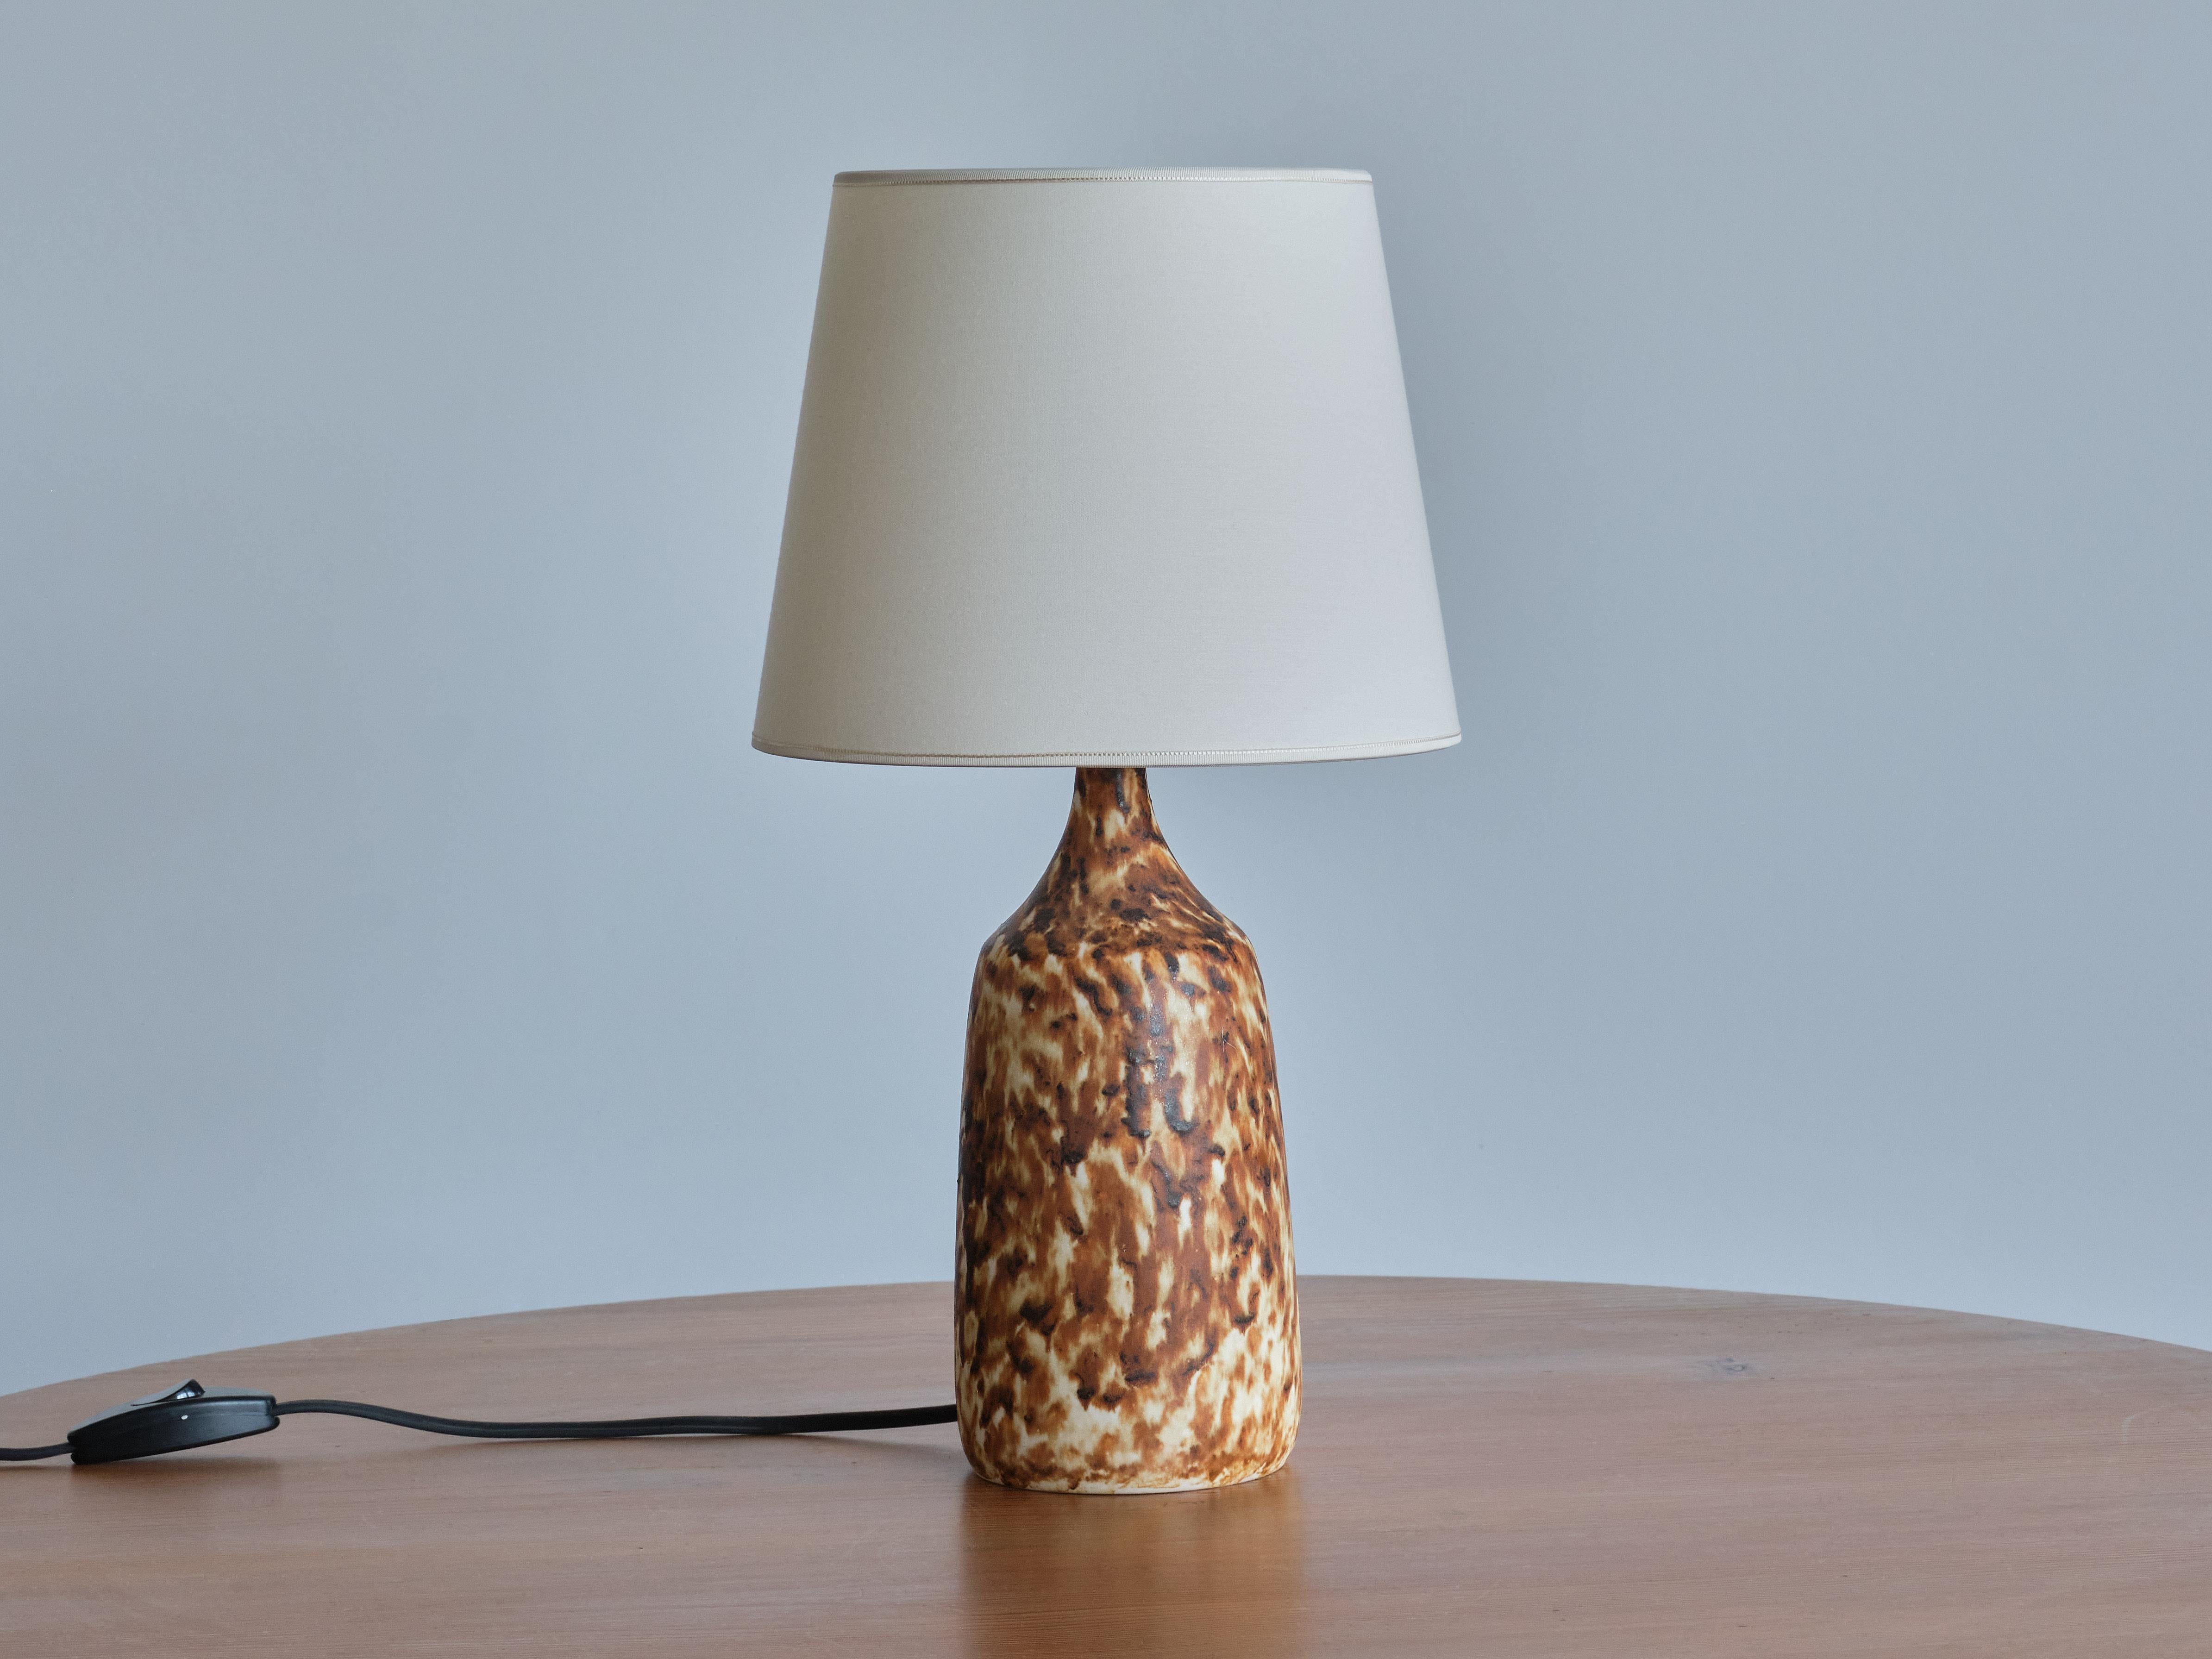 Gunnar Borg Glazed Stoneware Table Lamp, Höganäs, Sweden, 1960s In Good Condition For Sale In The Hague, NL